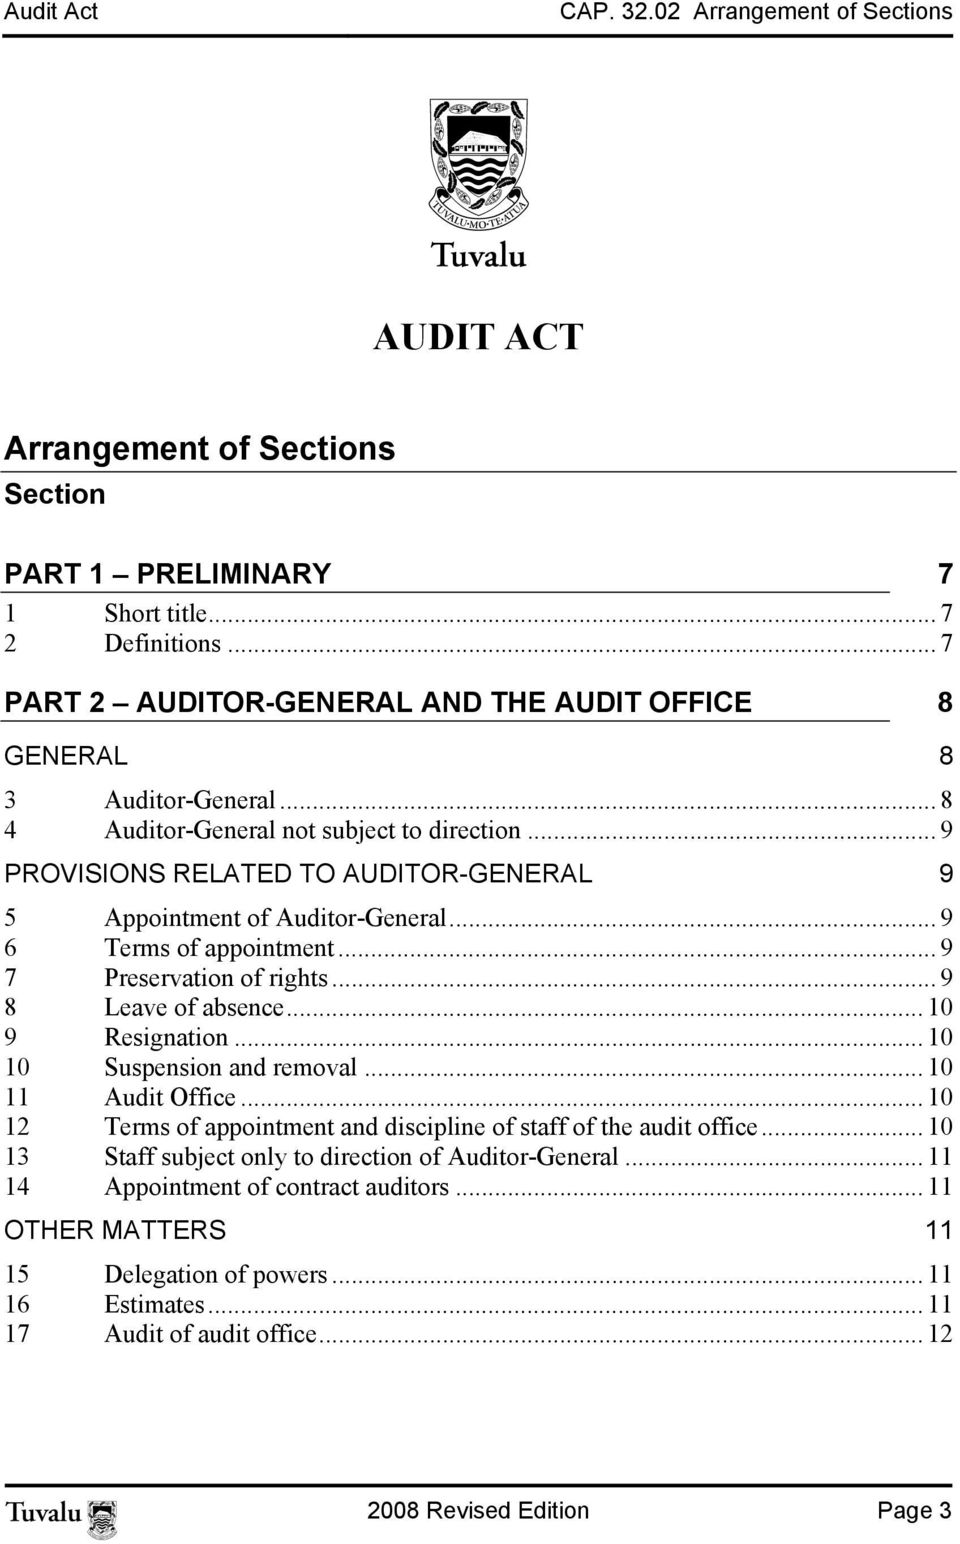 .. 9 PROVISIONS RELATED TO AUDITOR-GENERAL 9 5 Appointment of Auditor-General... 9 6 Terms of appointment... 9 7 Preservation of rights... 9 8 Leave of absence... 10 9 Resignation.